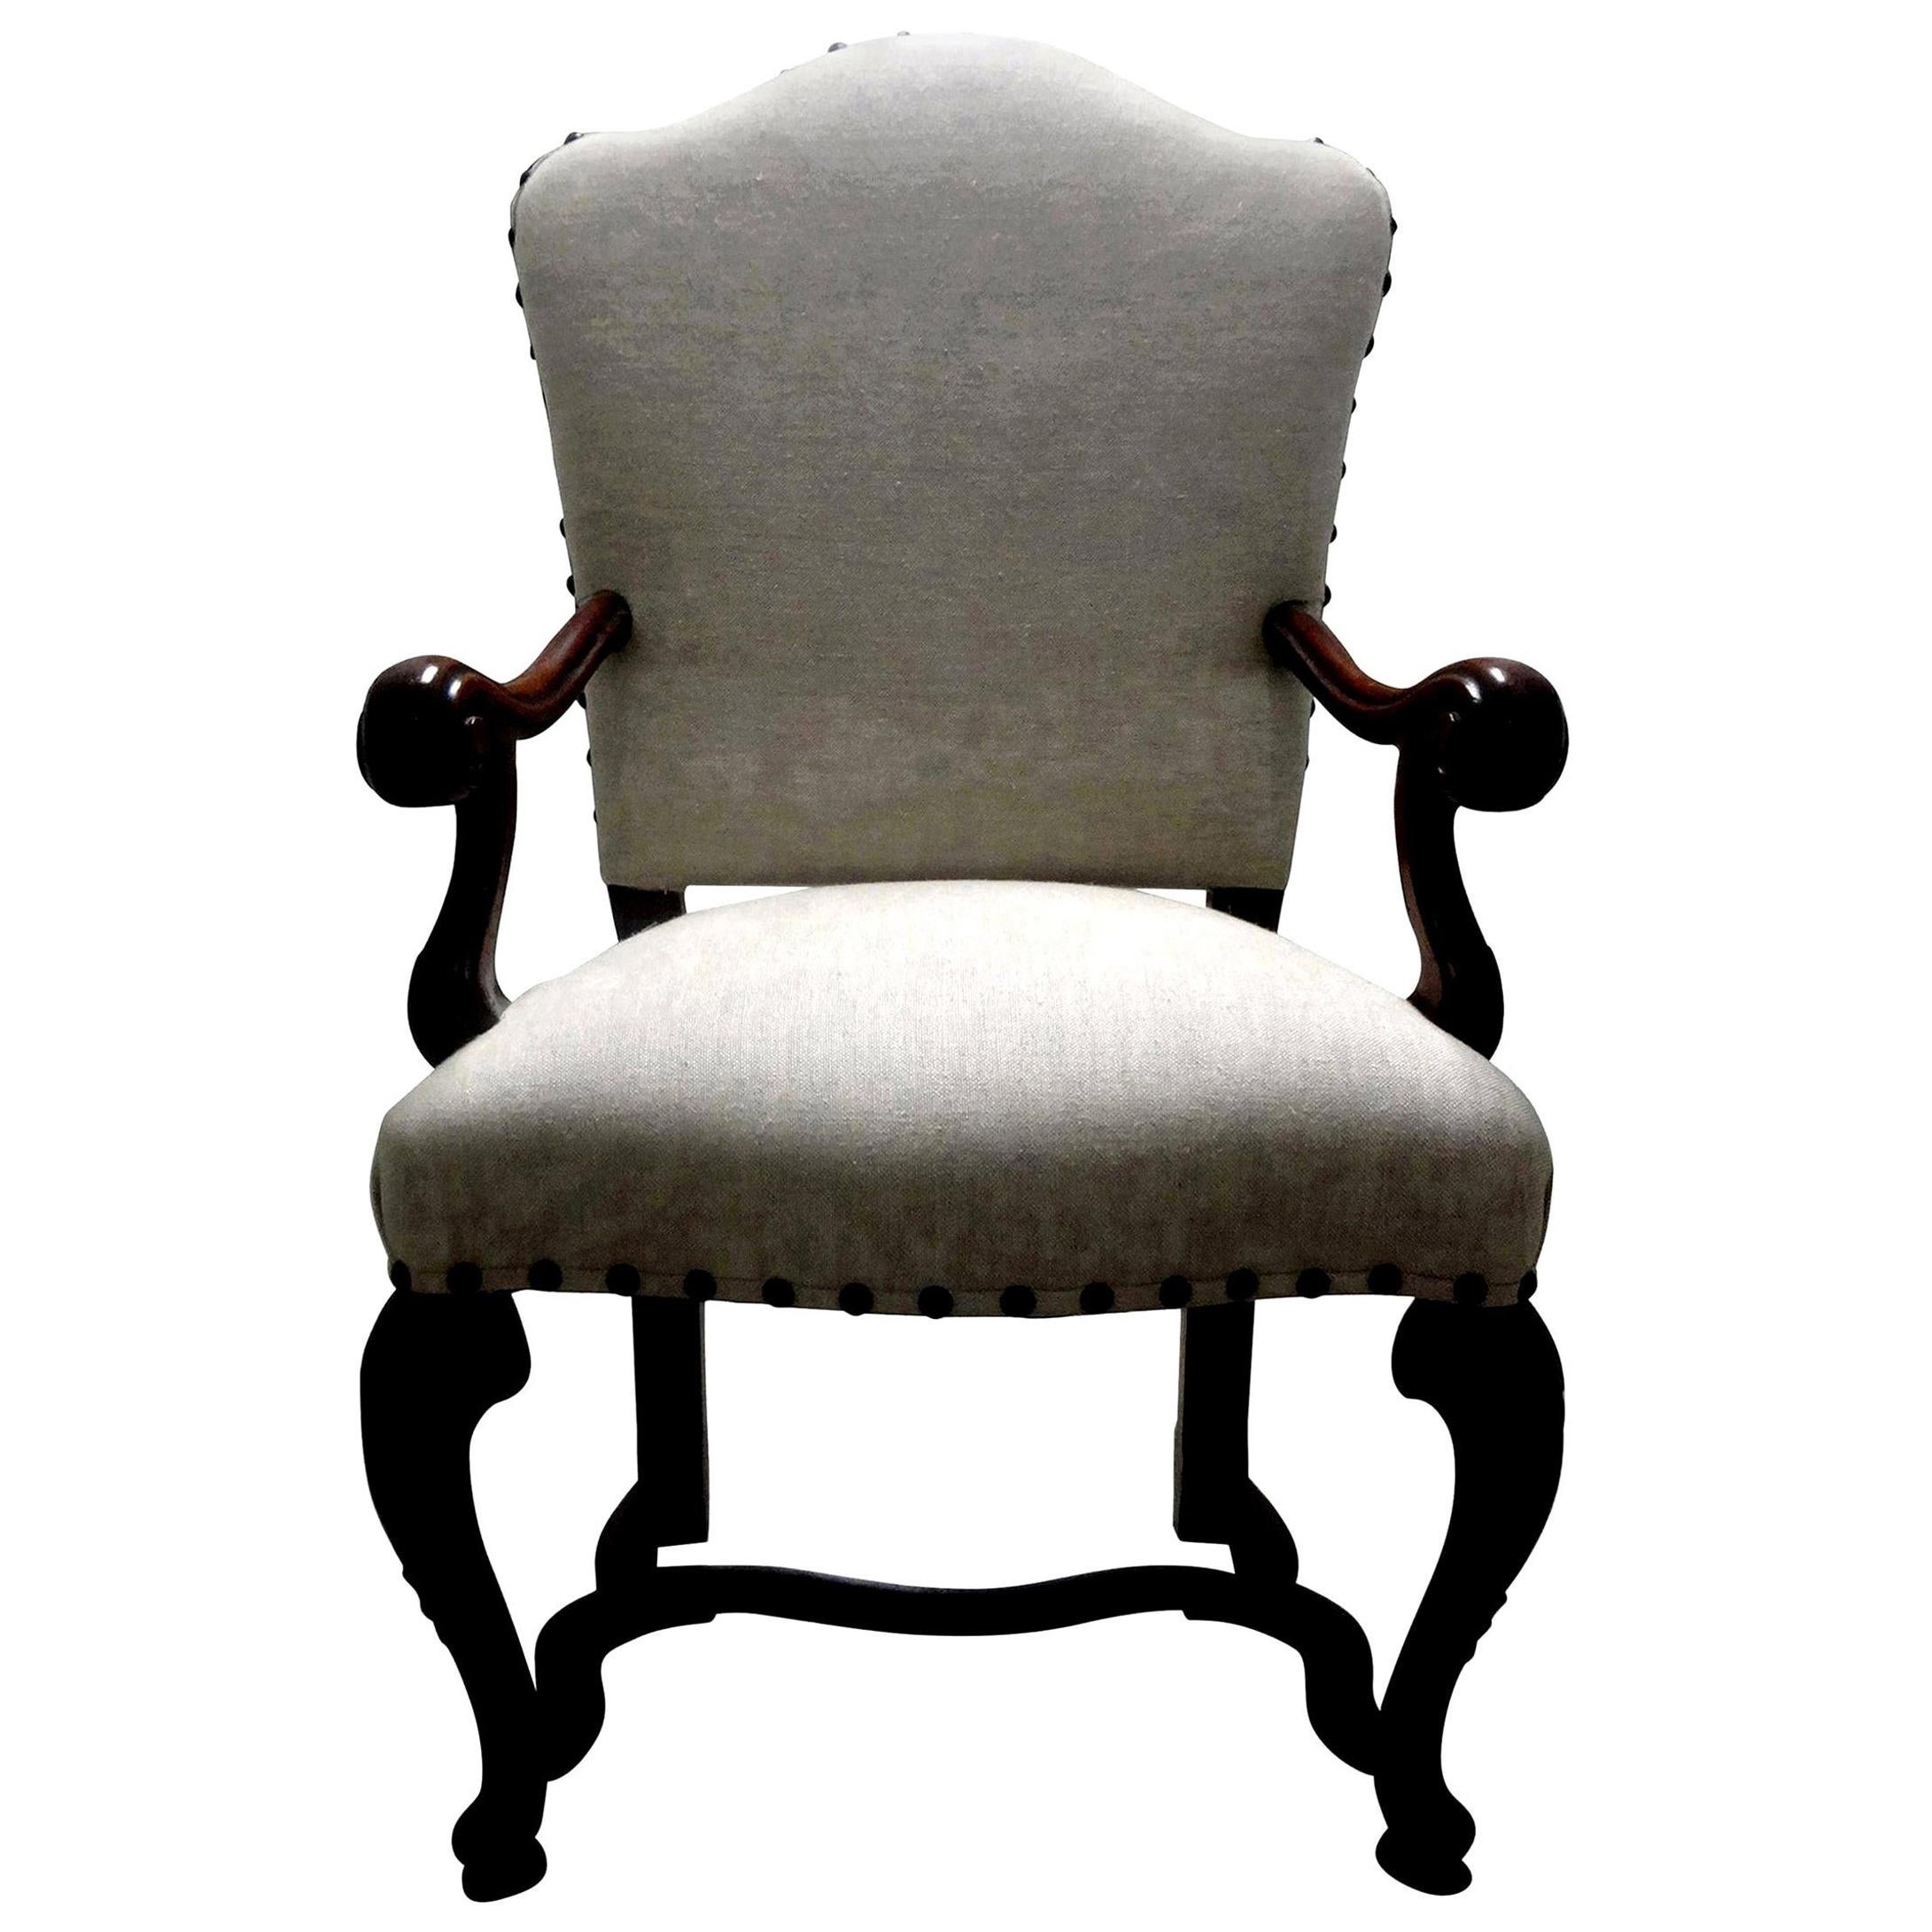 18th century Italian Louis XIV walnut chair.
Handsome 18th century northern Italian Louis XIV walnut chair. Our beautiful antique Italian walnut armchair was taken down to the frame and professionally upholstered in oatmeal colored linen with